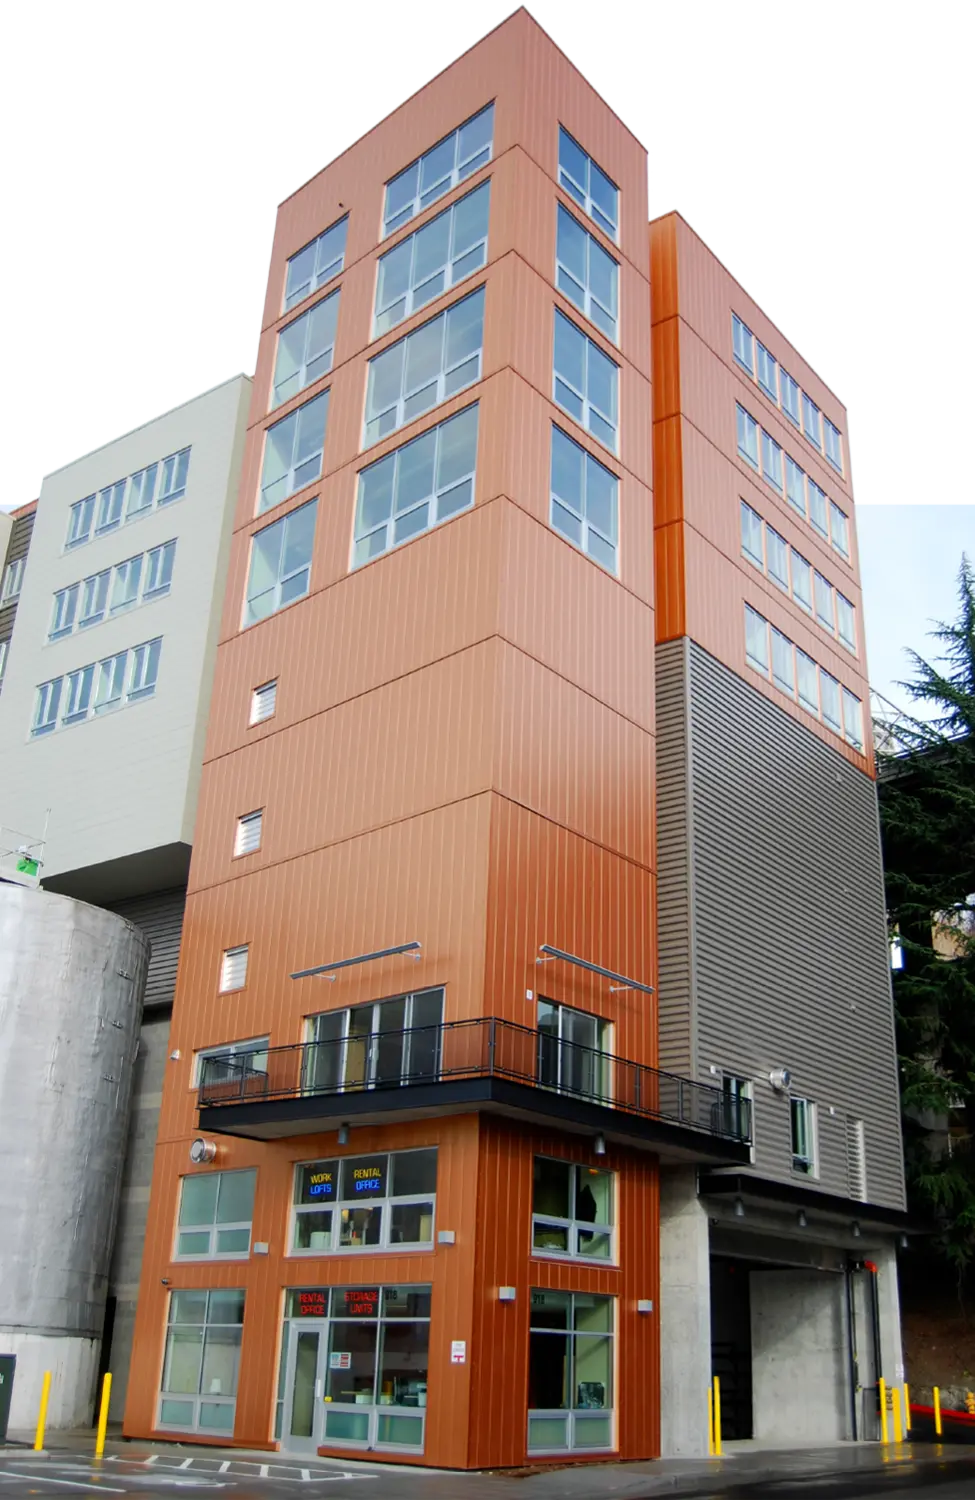 street view upward of a tall multi-storied storage facility with an orange and gray blocked façade